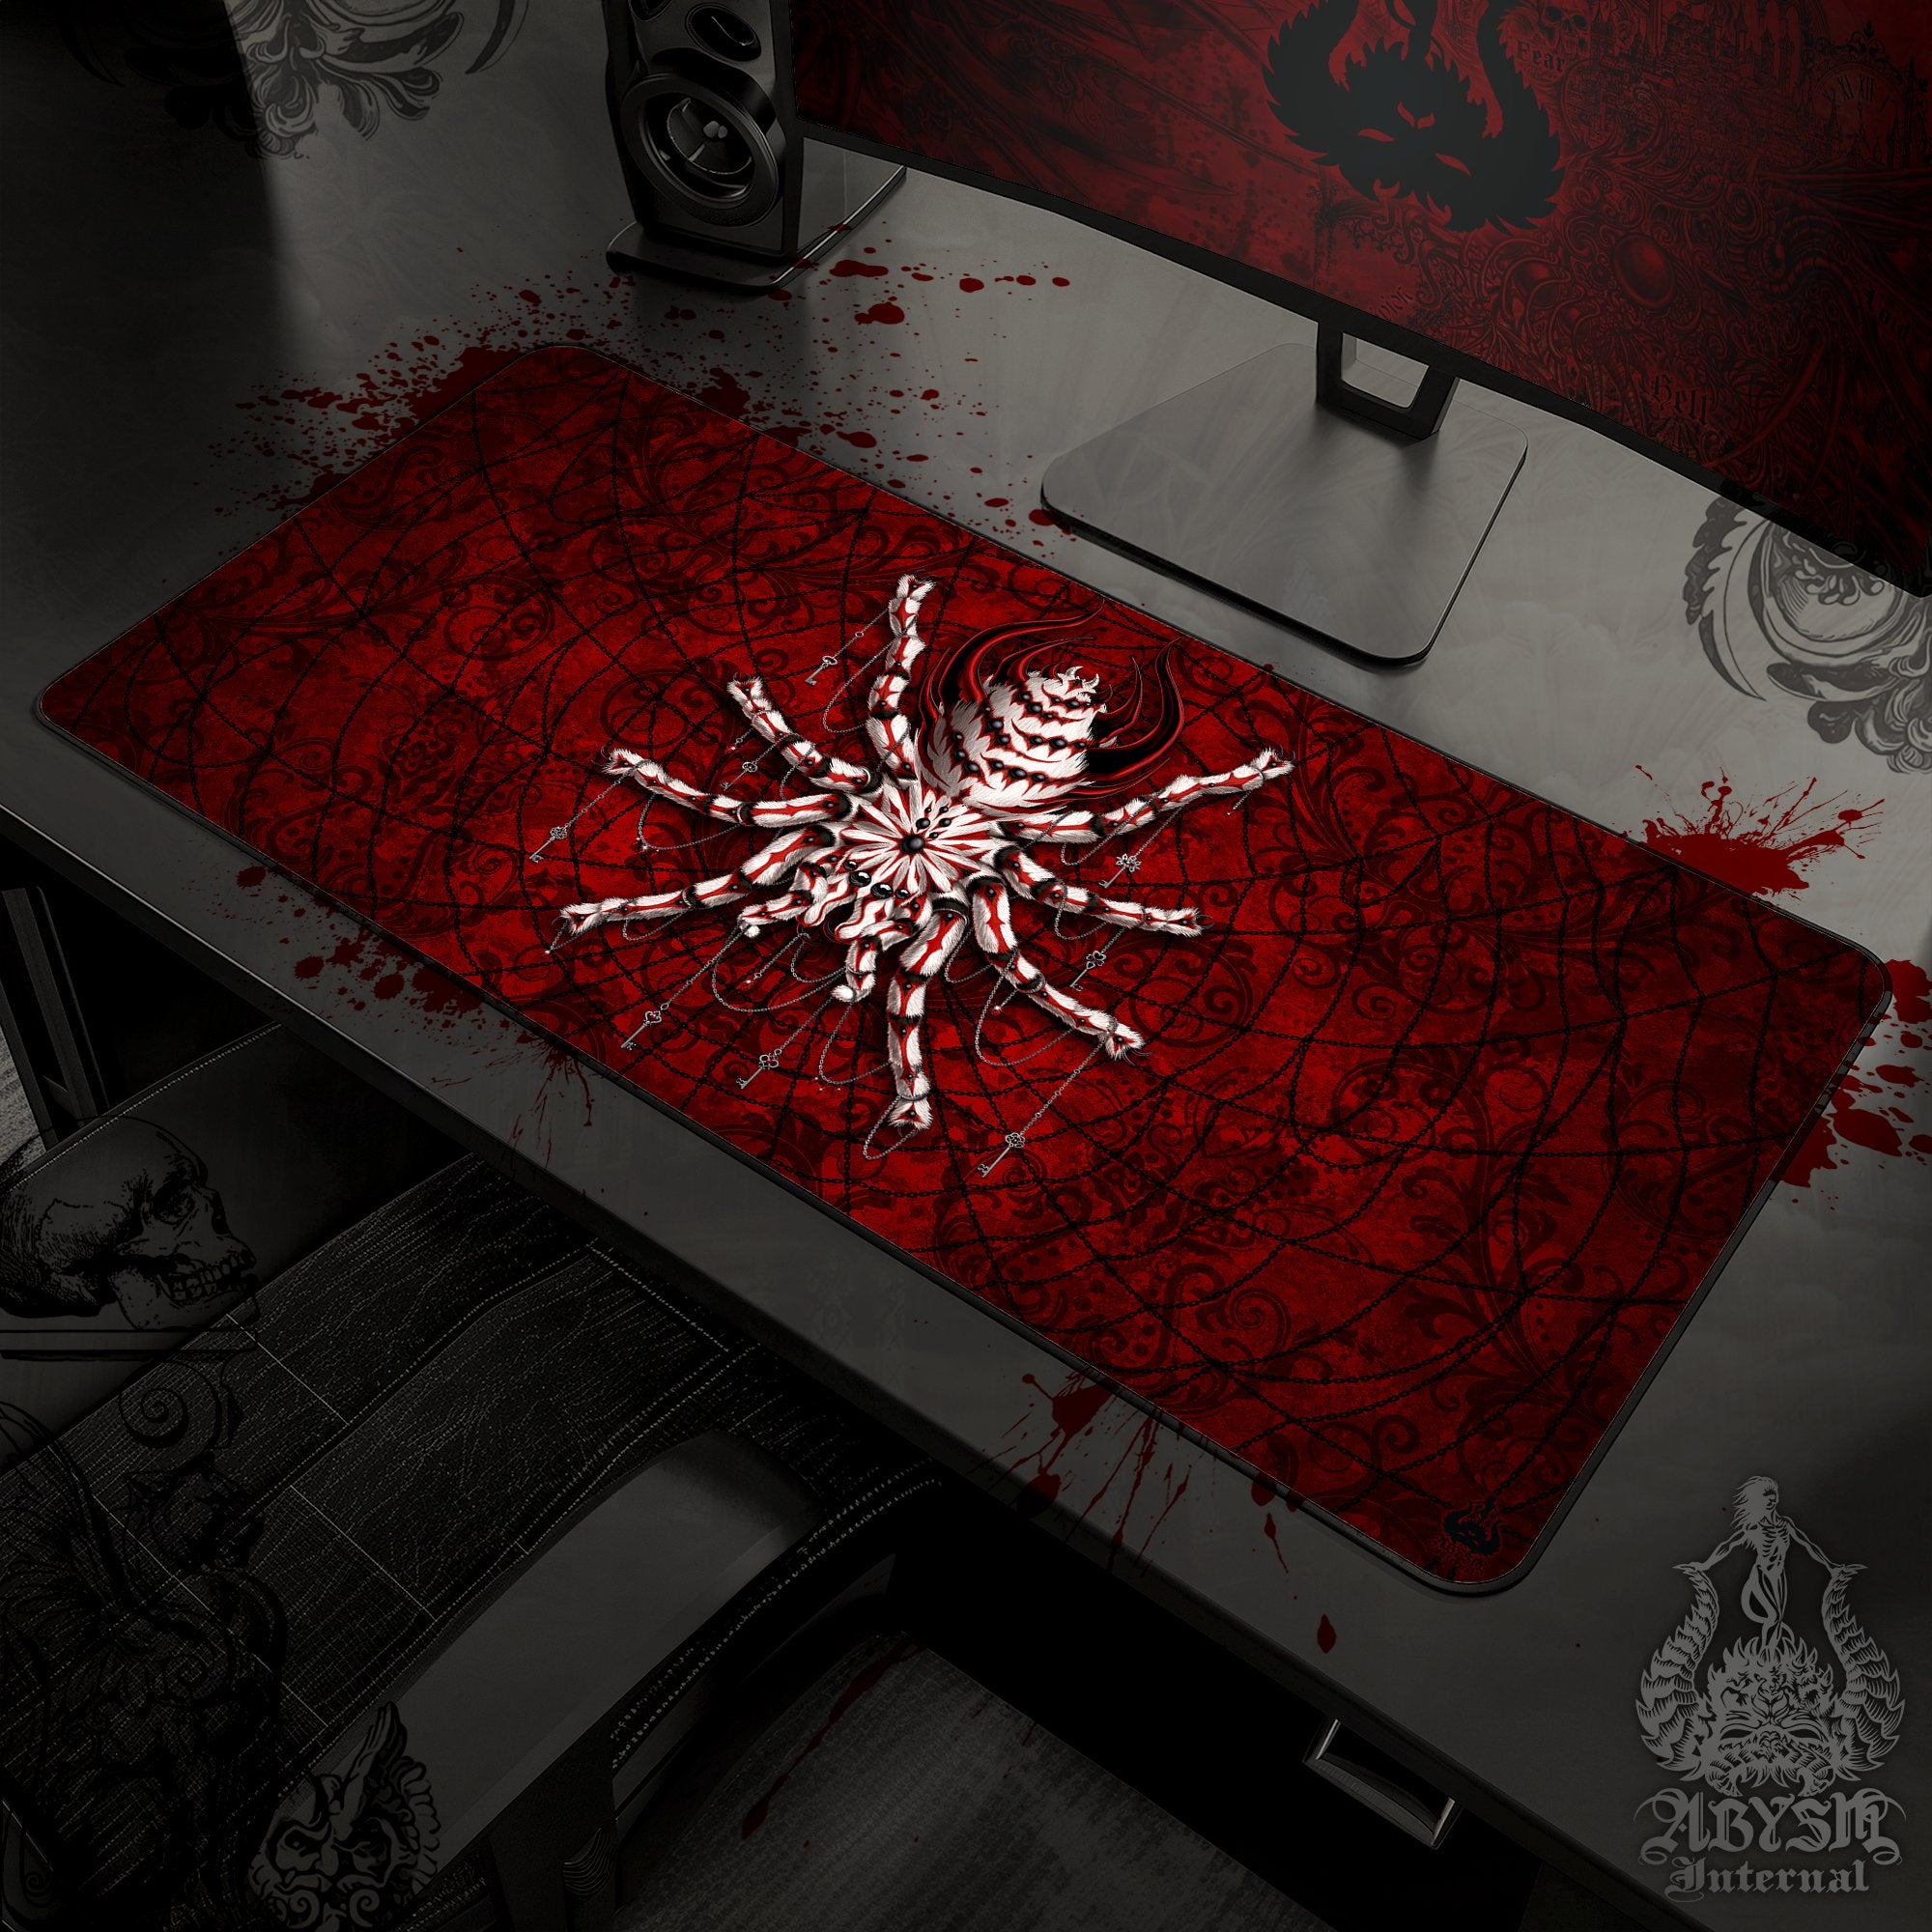 Gothic Gaming Mouse Pad, Spider Desk Mat, Tarantula Table Protector Cover, Halloween Workpad, Bloody Goth Art Print - 2 Colors - Abysm Internal